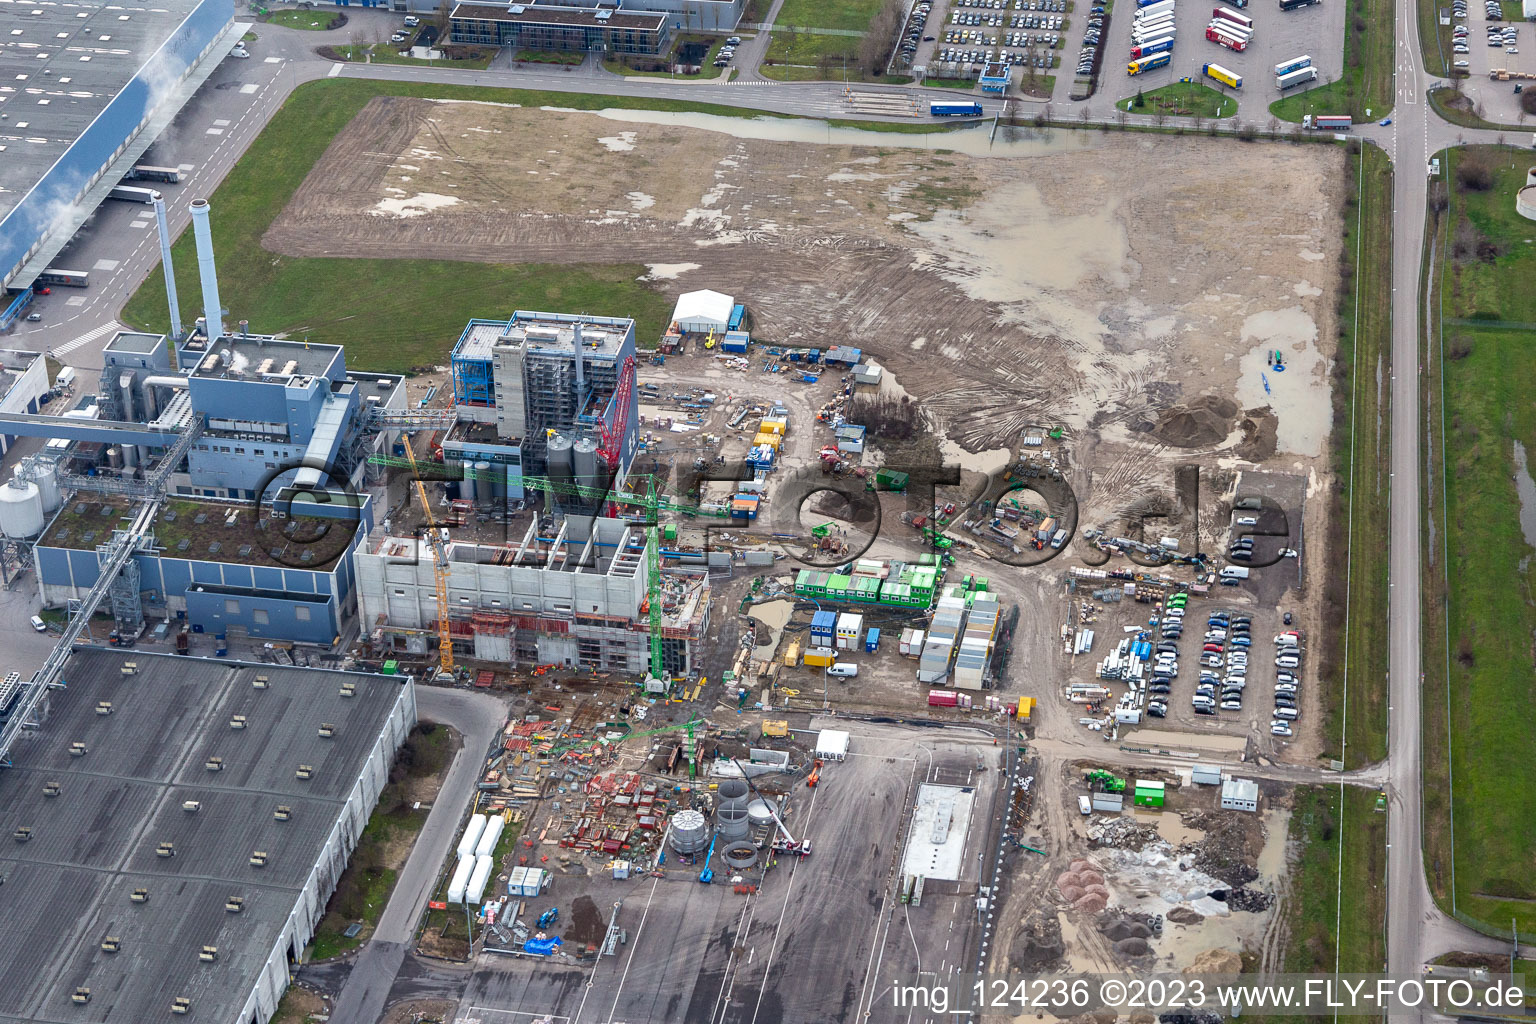 Drone recording of Construction of the new gas- hydrogen-power plant at paer mill Papierfabrik Palm GmbH & Co. KG in the district Industriegebiet Woerth-Oberwald in Woerth am Rhein in the state Rhineland-Palatinate